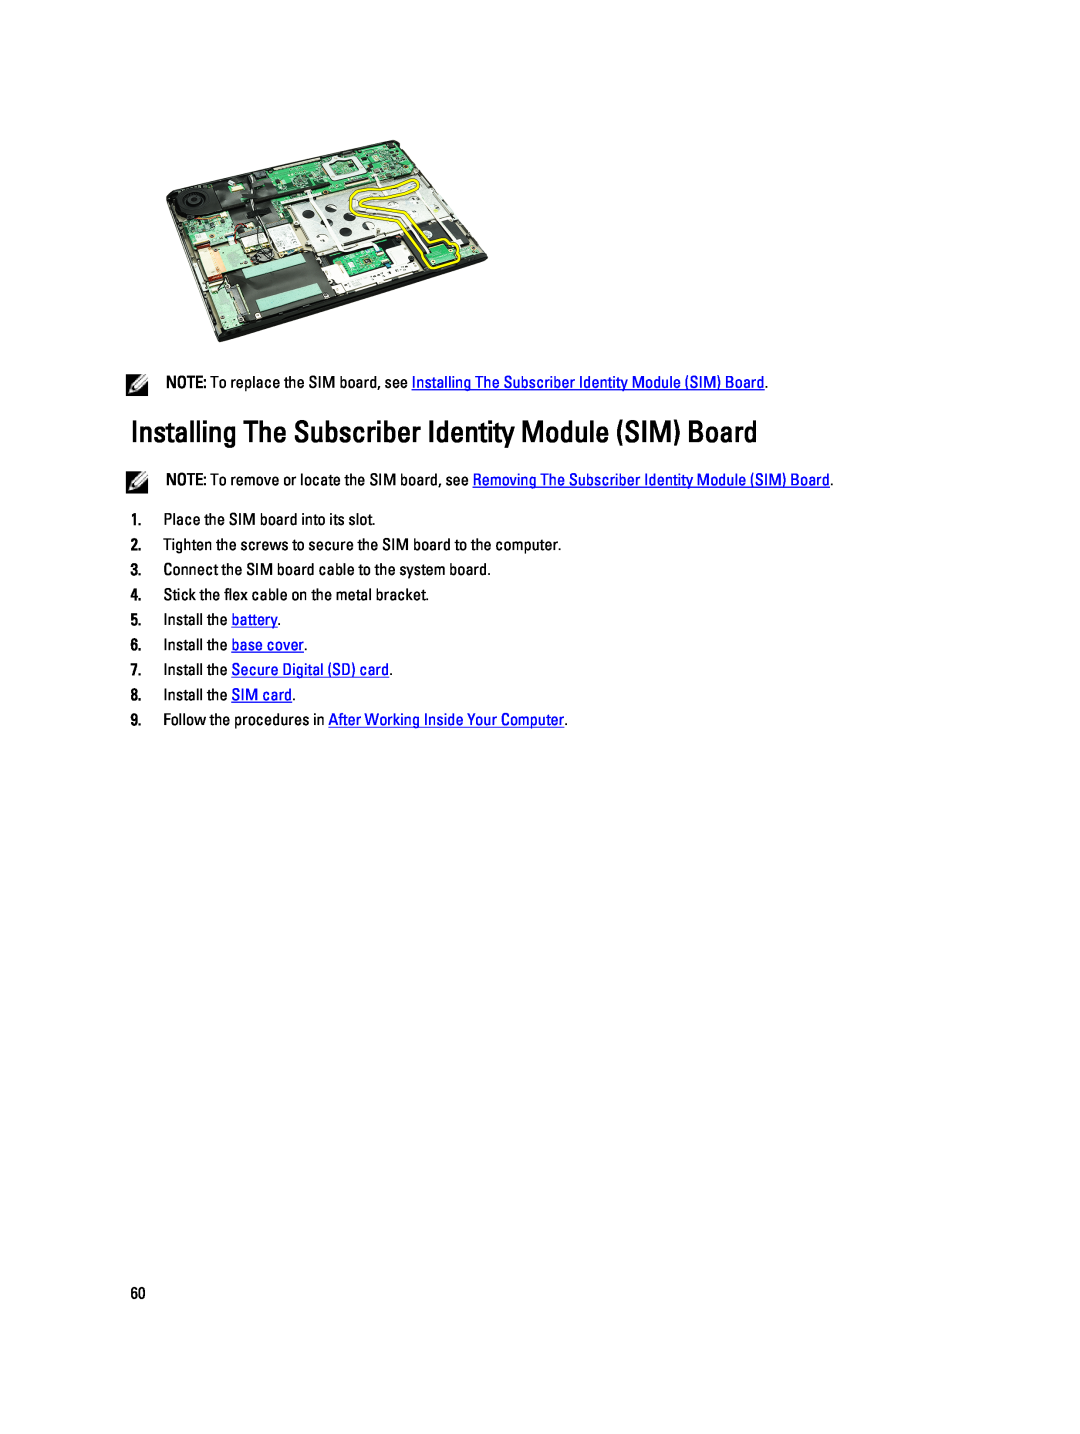 Dell V130 service manual Installing The Subscriber Identity Module SIM Board, Install the Secure Digital SD card 